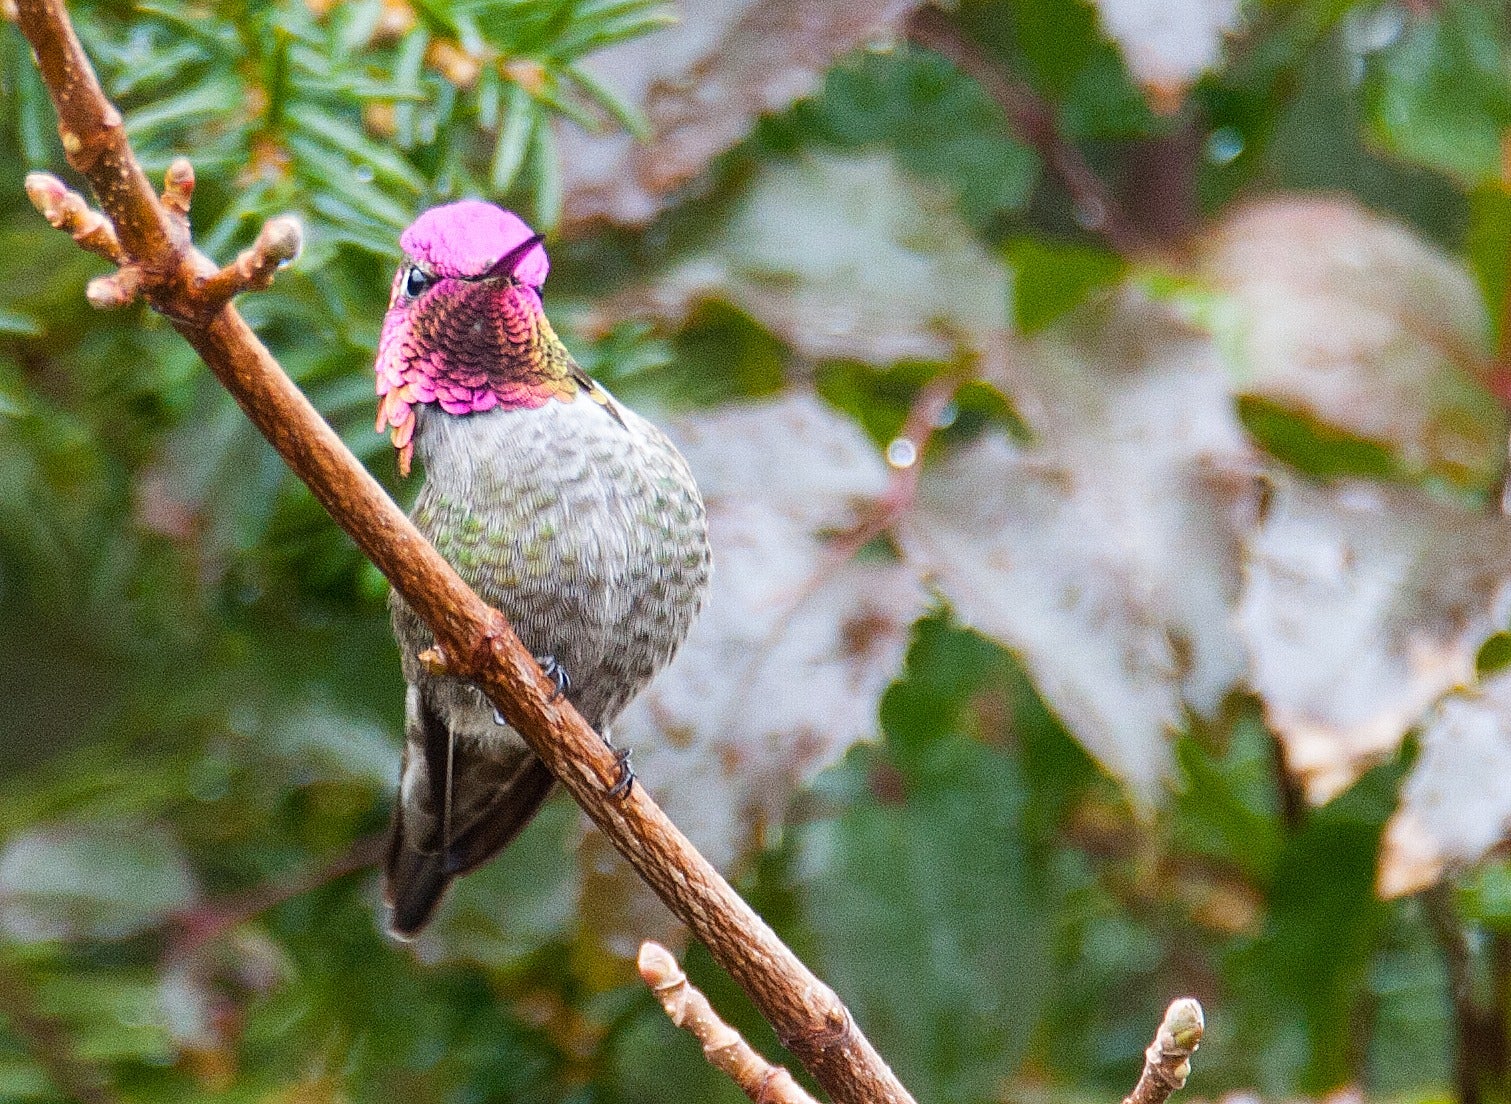 a hummingbird with a bright pink head sits perched on a thin branch